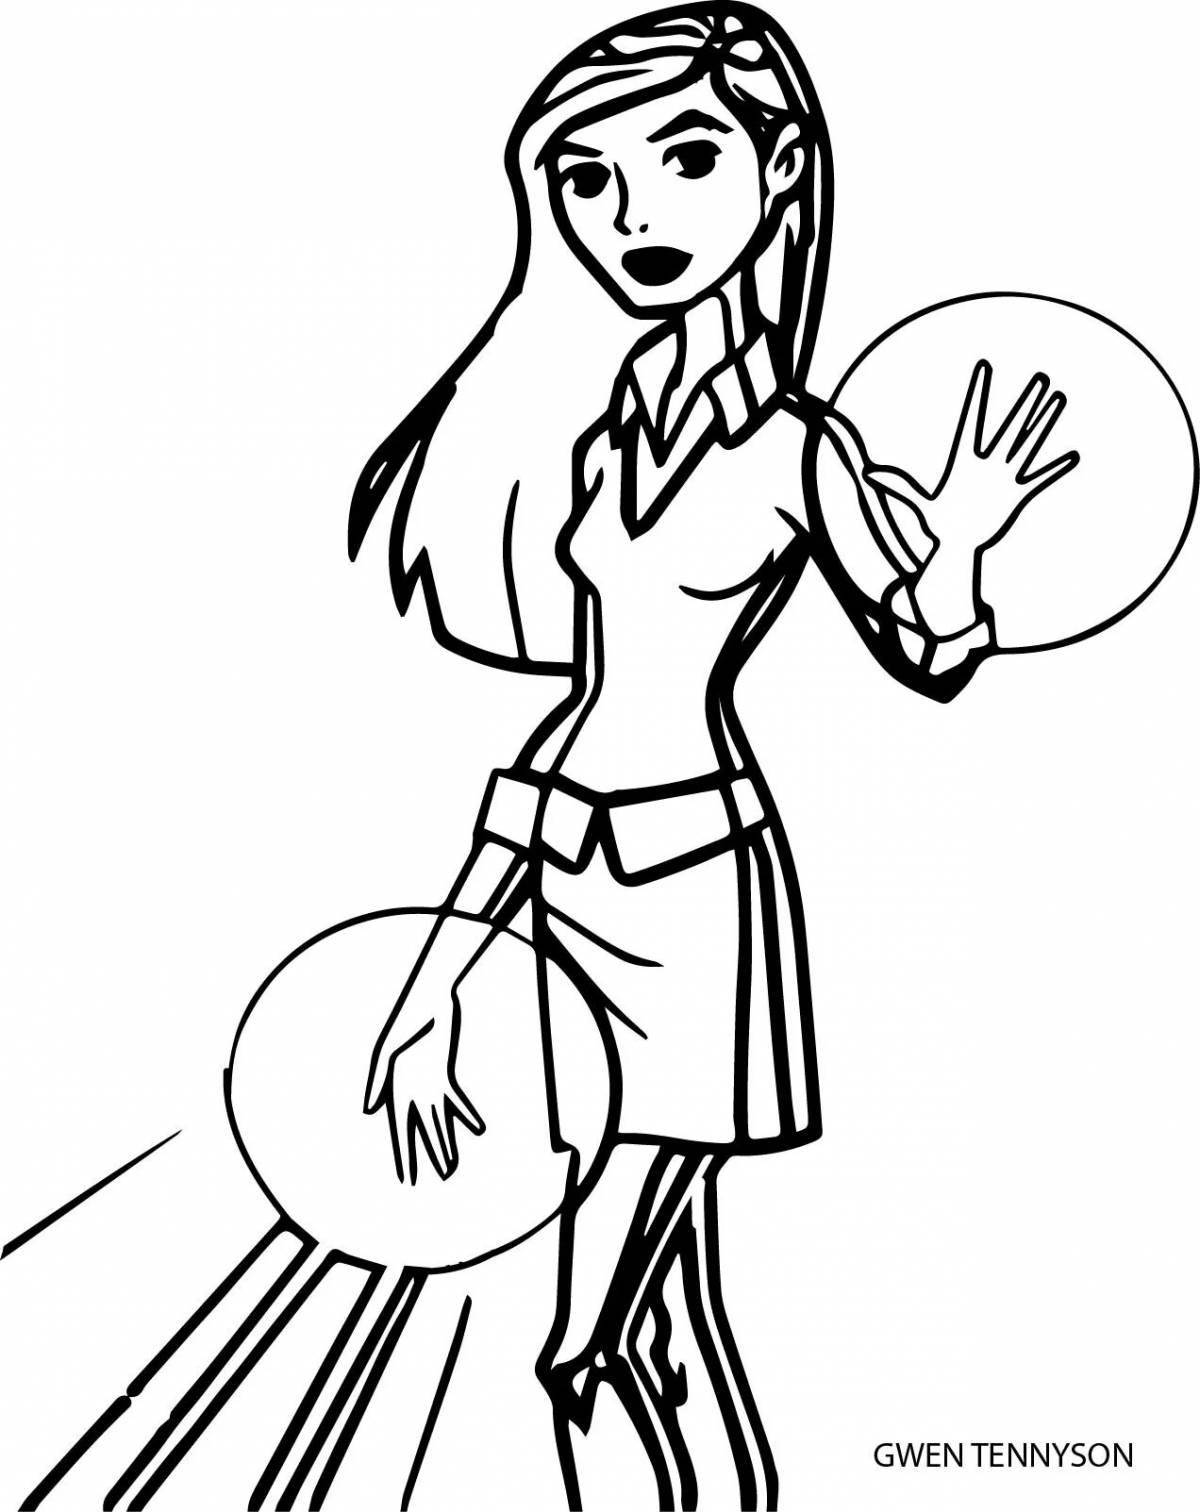 Colorful gwen coloring page